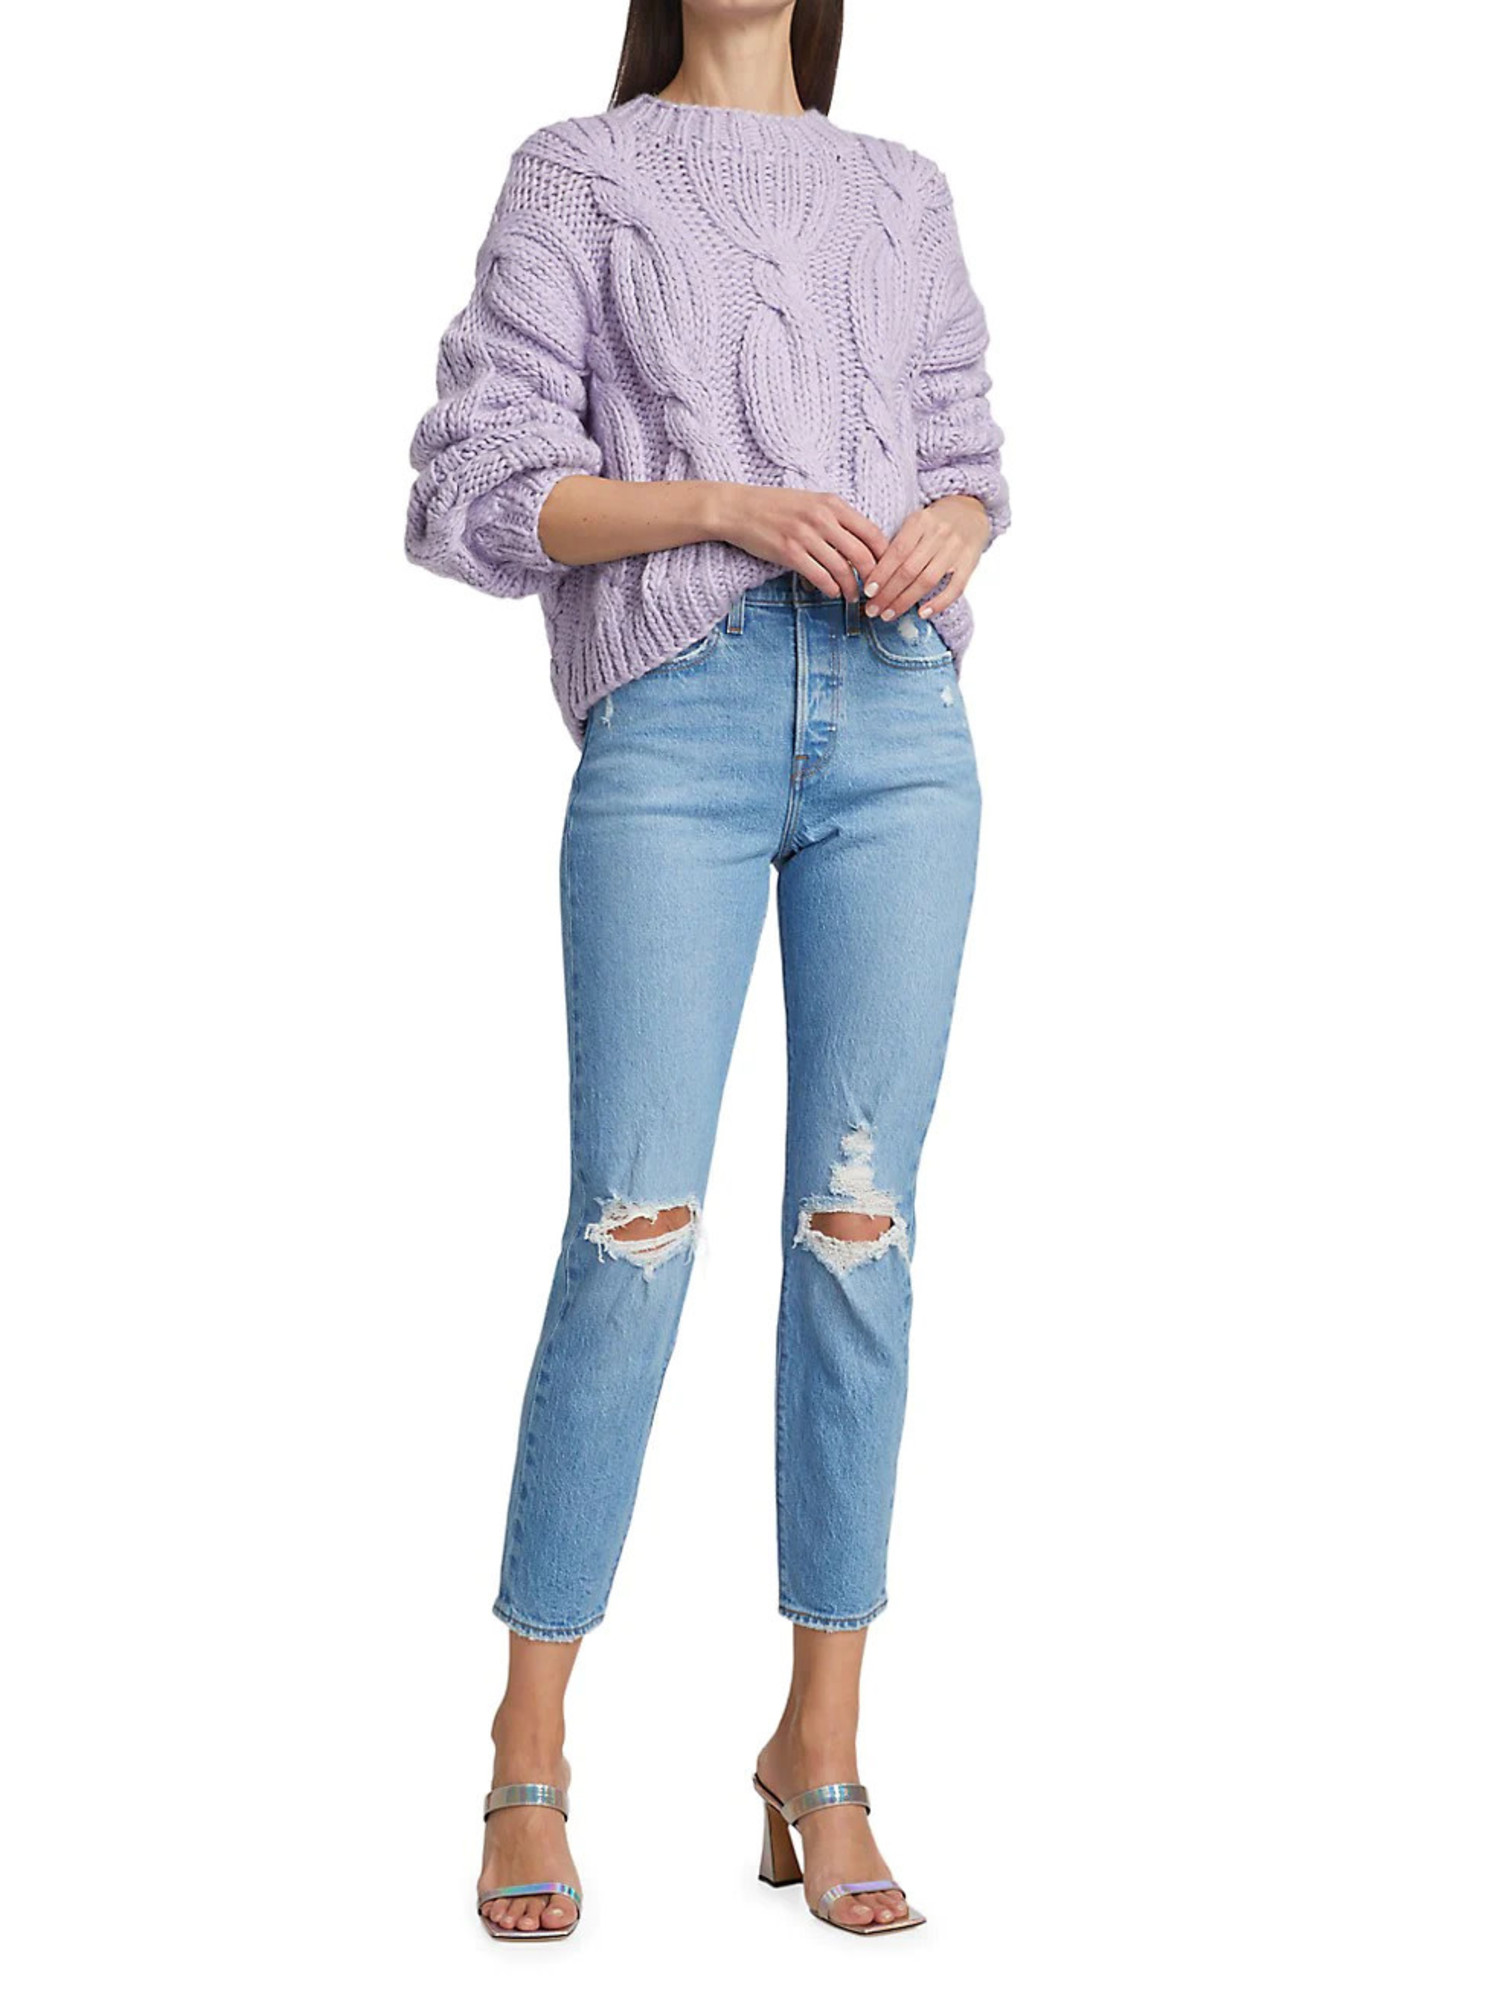 Levi's Denim  Wedgie Icon Fit - Jazz Devoted - Tryst Boutique